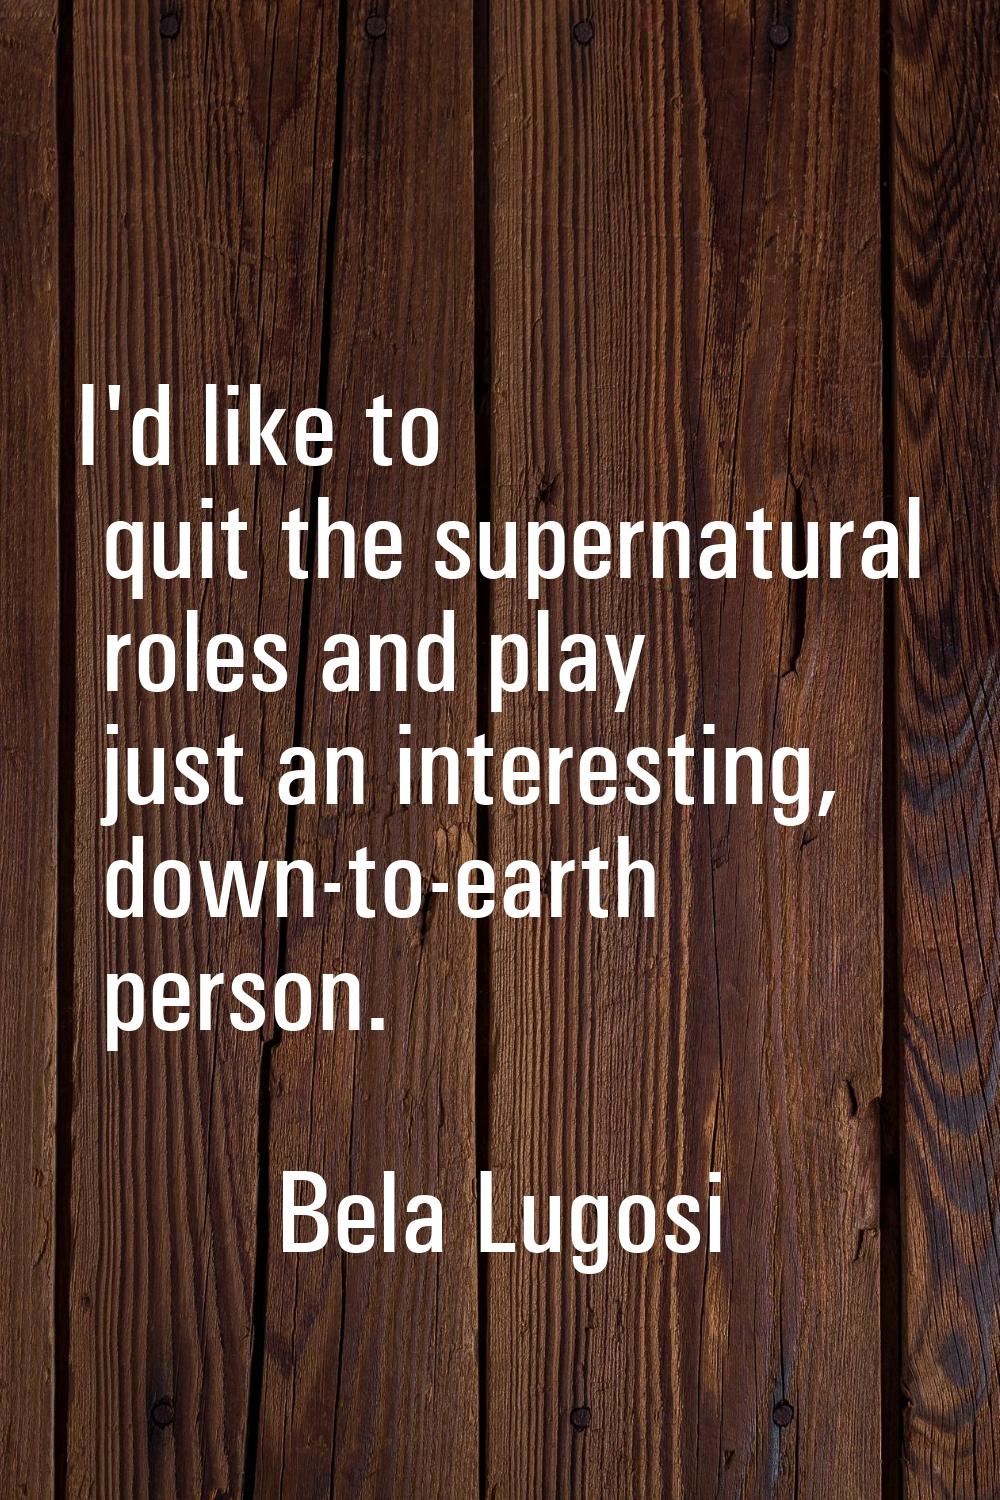 I'd like to quit the supernatural roles and play just an interesting, down-to-earth person.